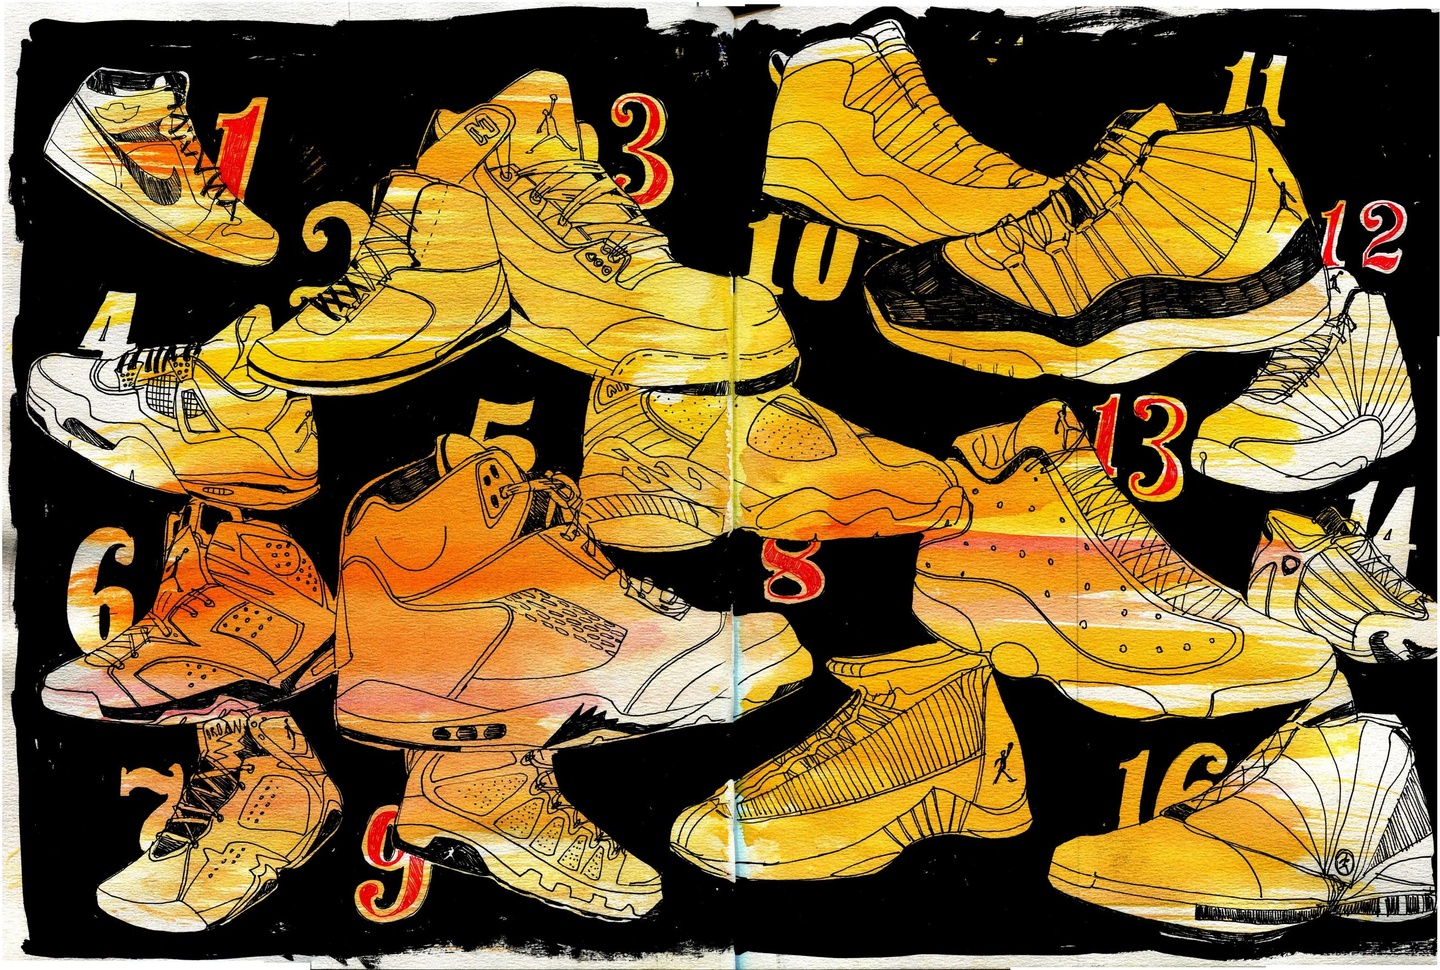 Illustration spread of Air Jordans drawn on black over a yellows and orange on a black background.